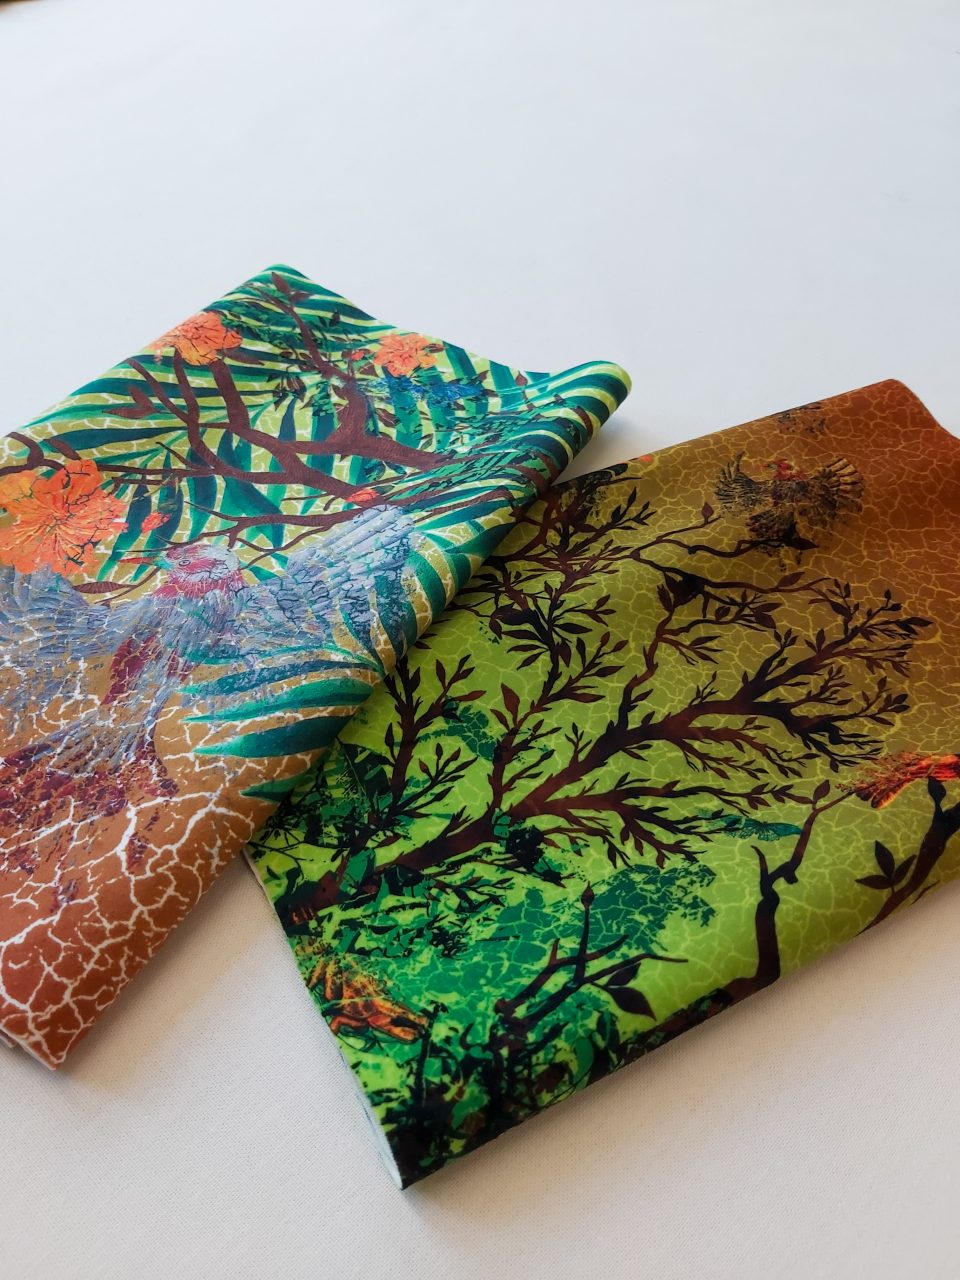 Image of 2 coordinating fabrics showing printed forest scenes